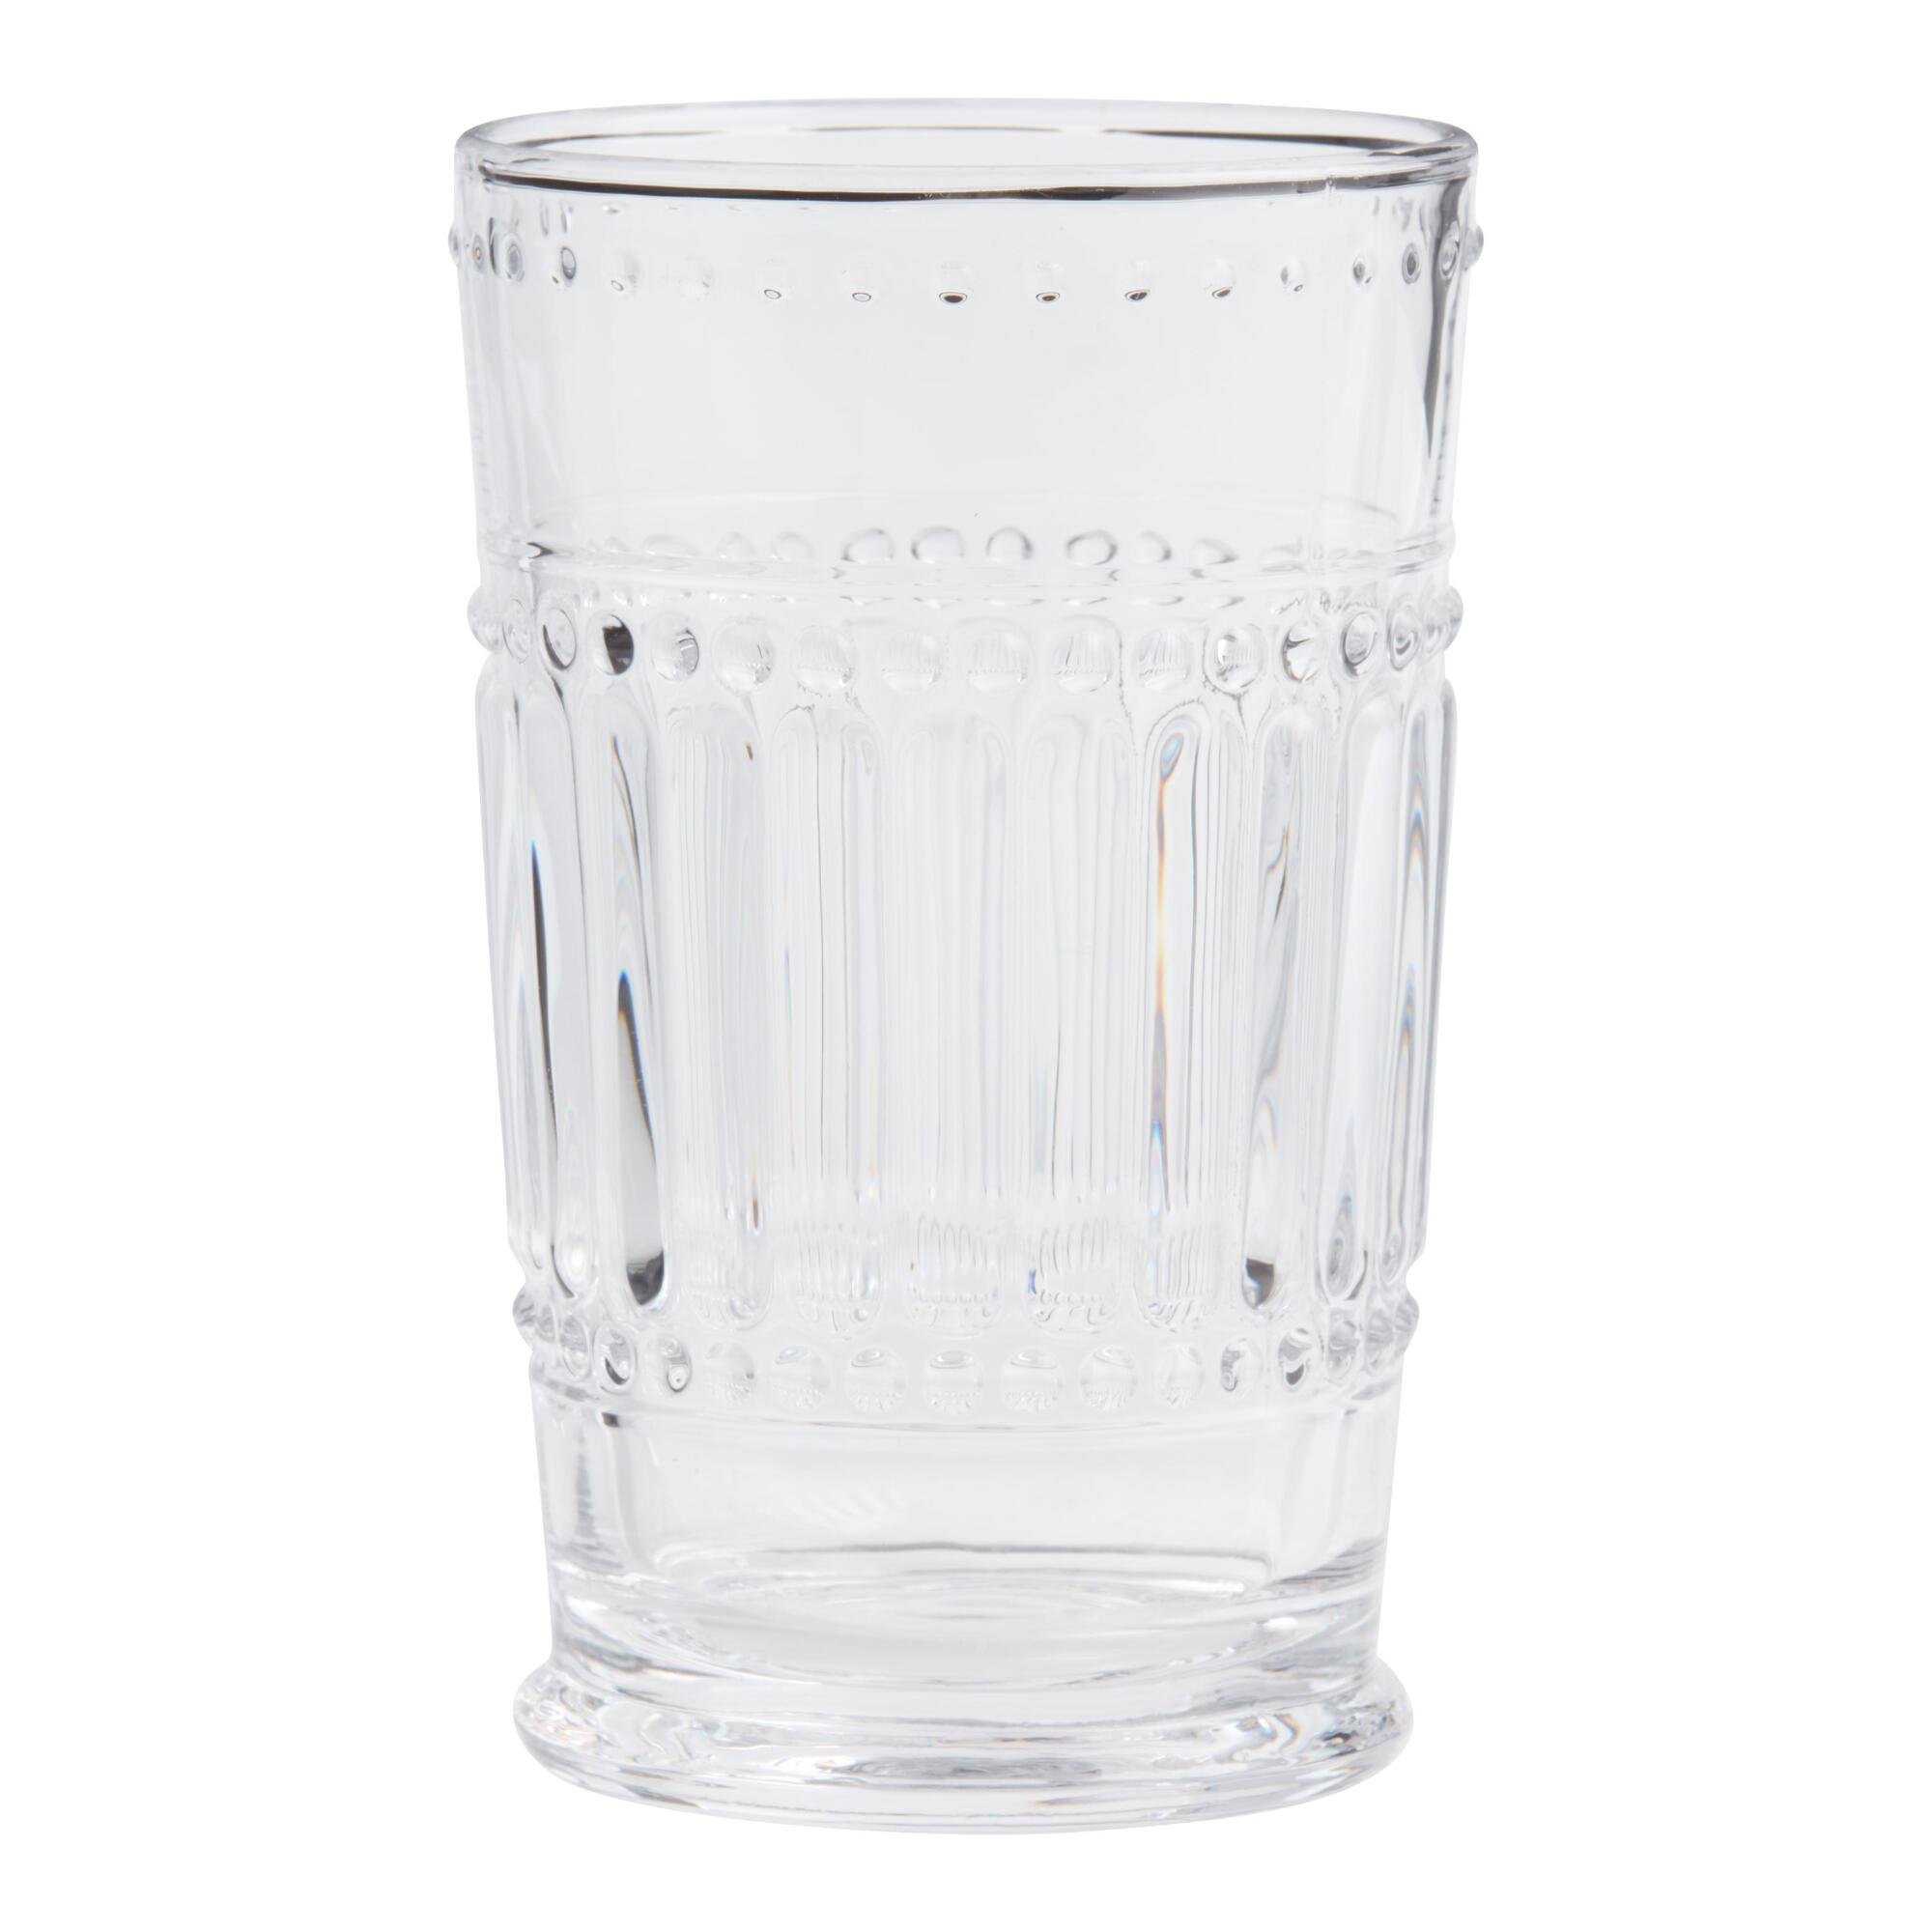 Clear Pressed Glass Highball Glasses Set Of 4 - $19.96 - World Market